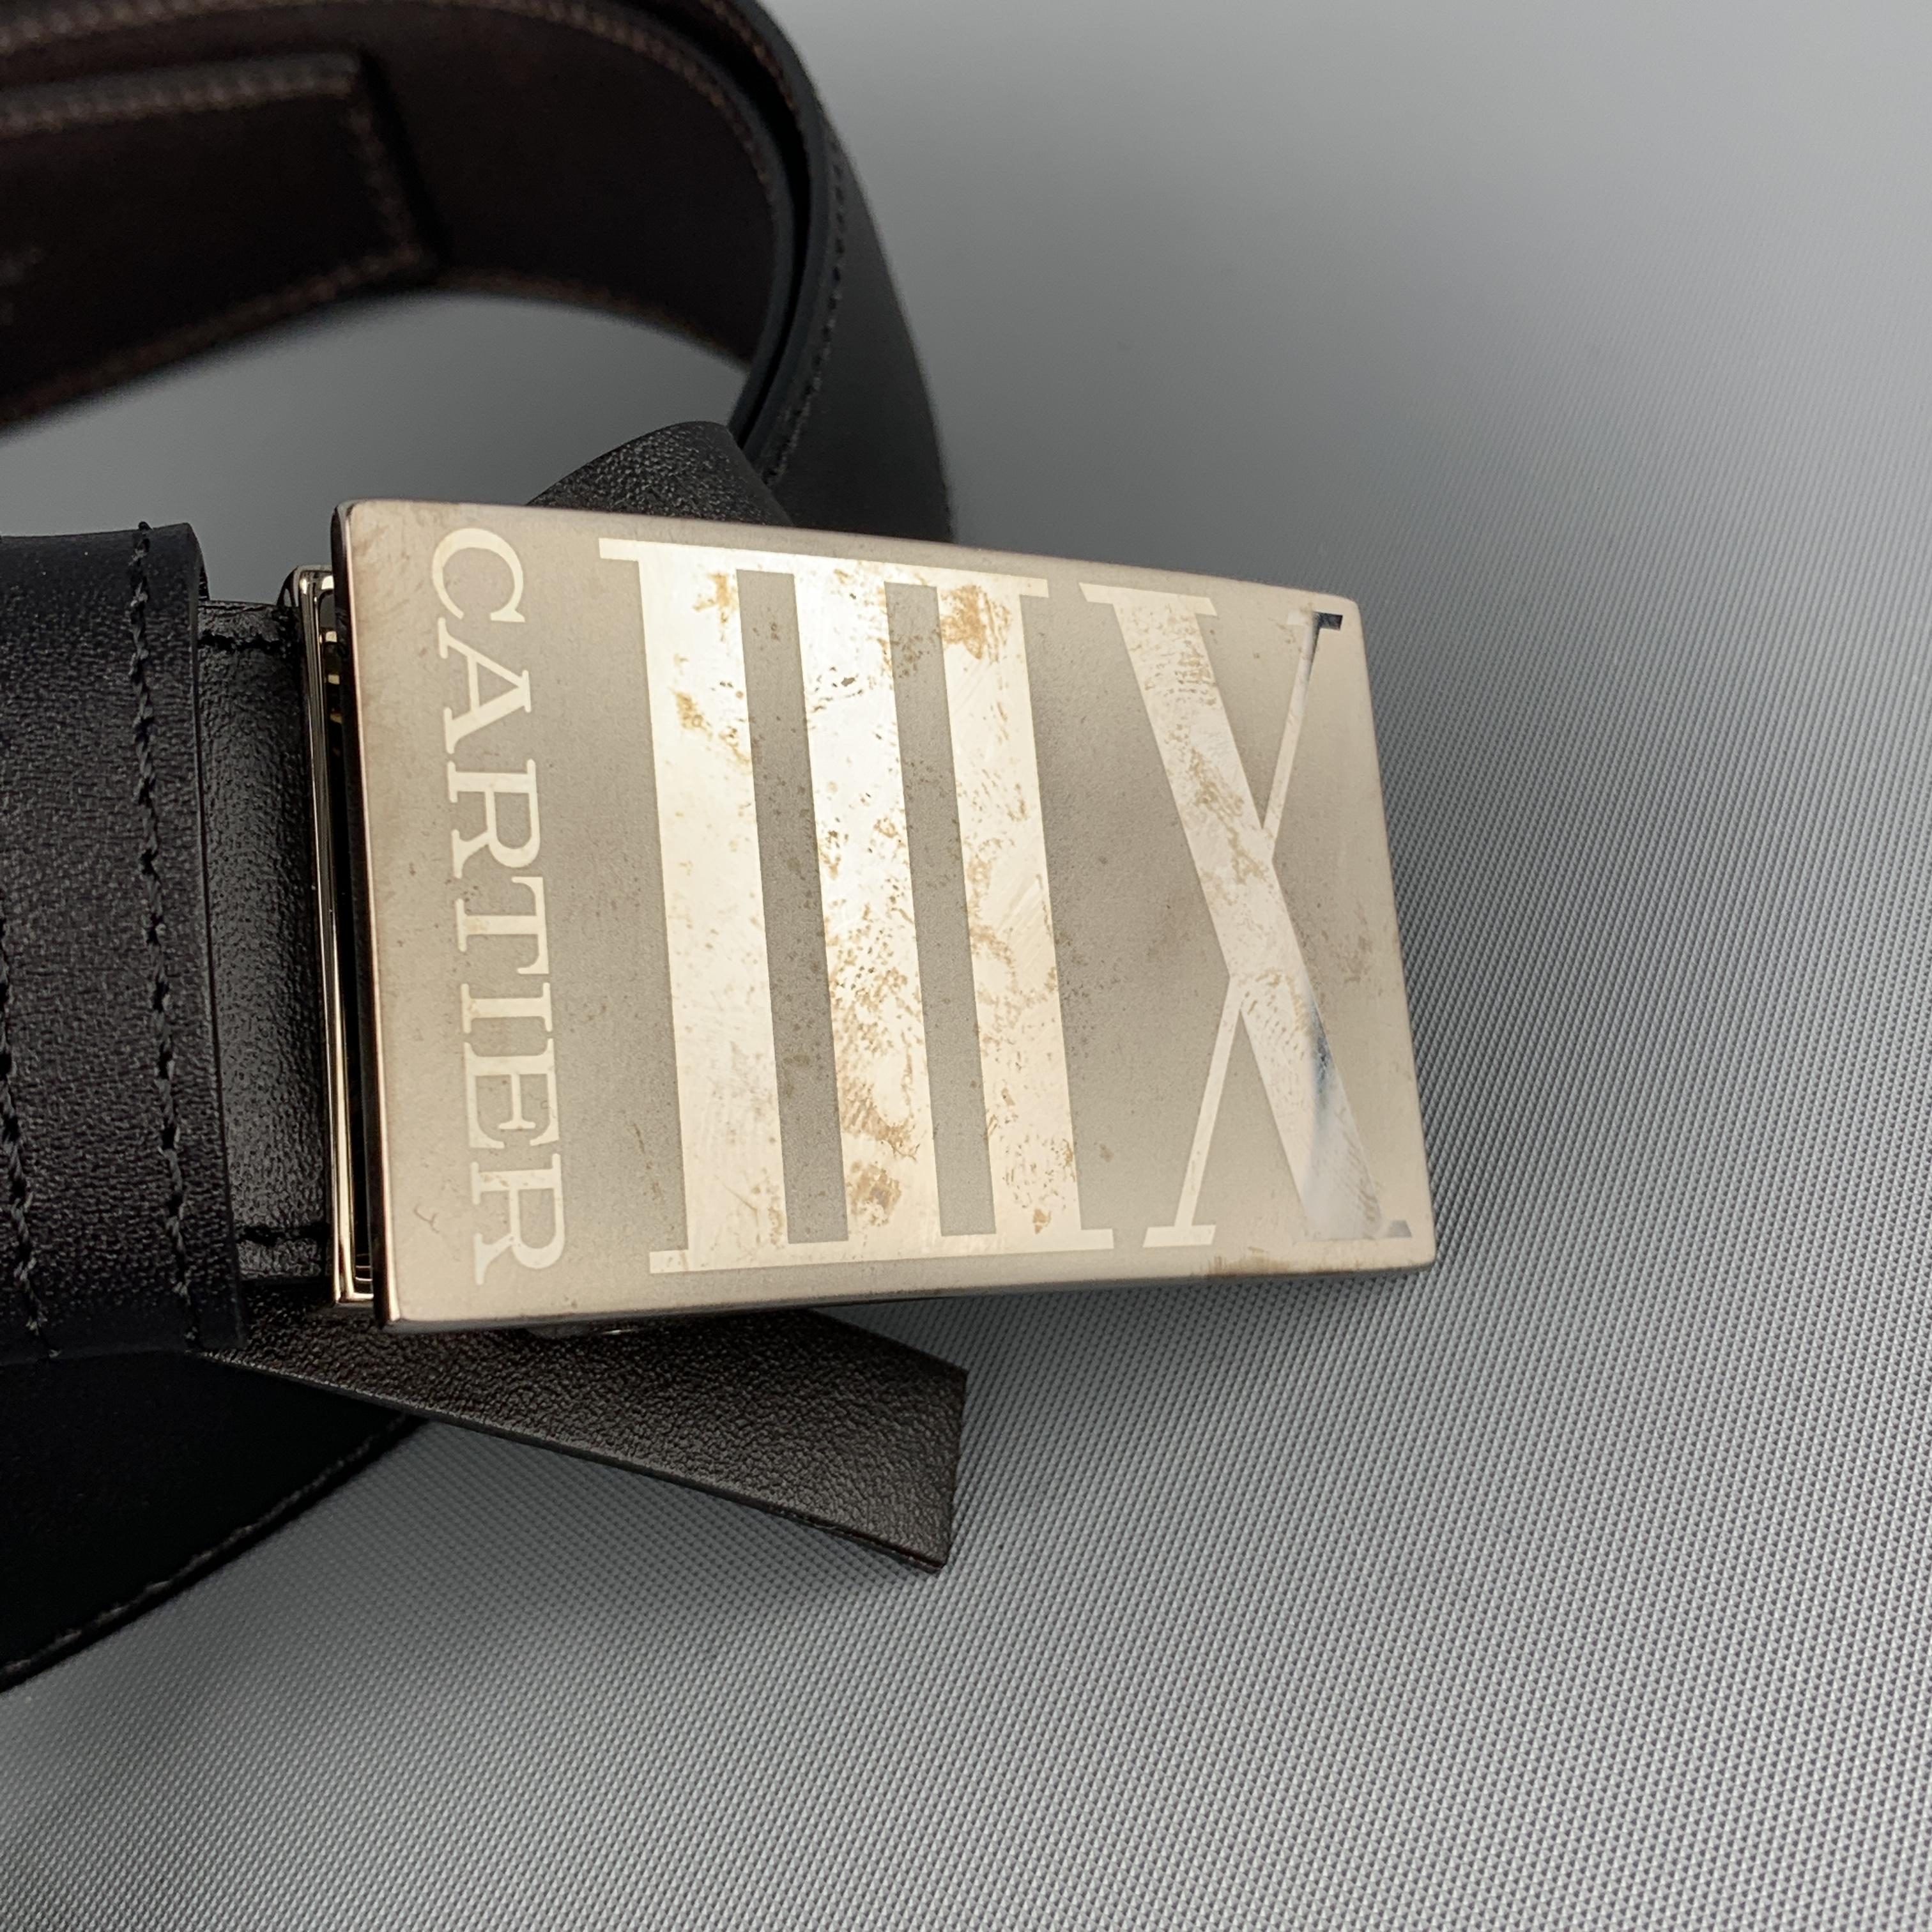 Vintage CARTIER belt features a reversible black and dark brown leather strap with a silver tone XIII buckle. Tarnishing on buckle from storage. As-is. Includes box and card. Made in France.
 
New with Defects.
Marked: (no size)
 
Length: 50